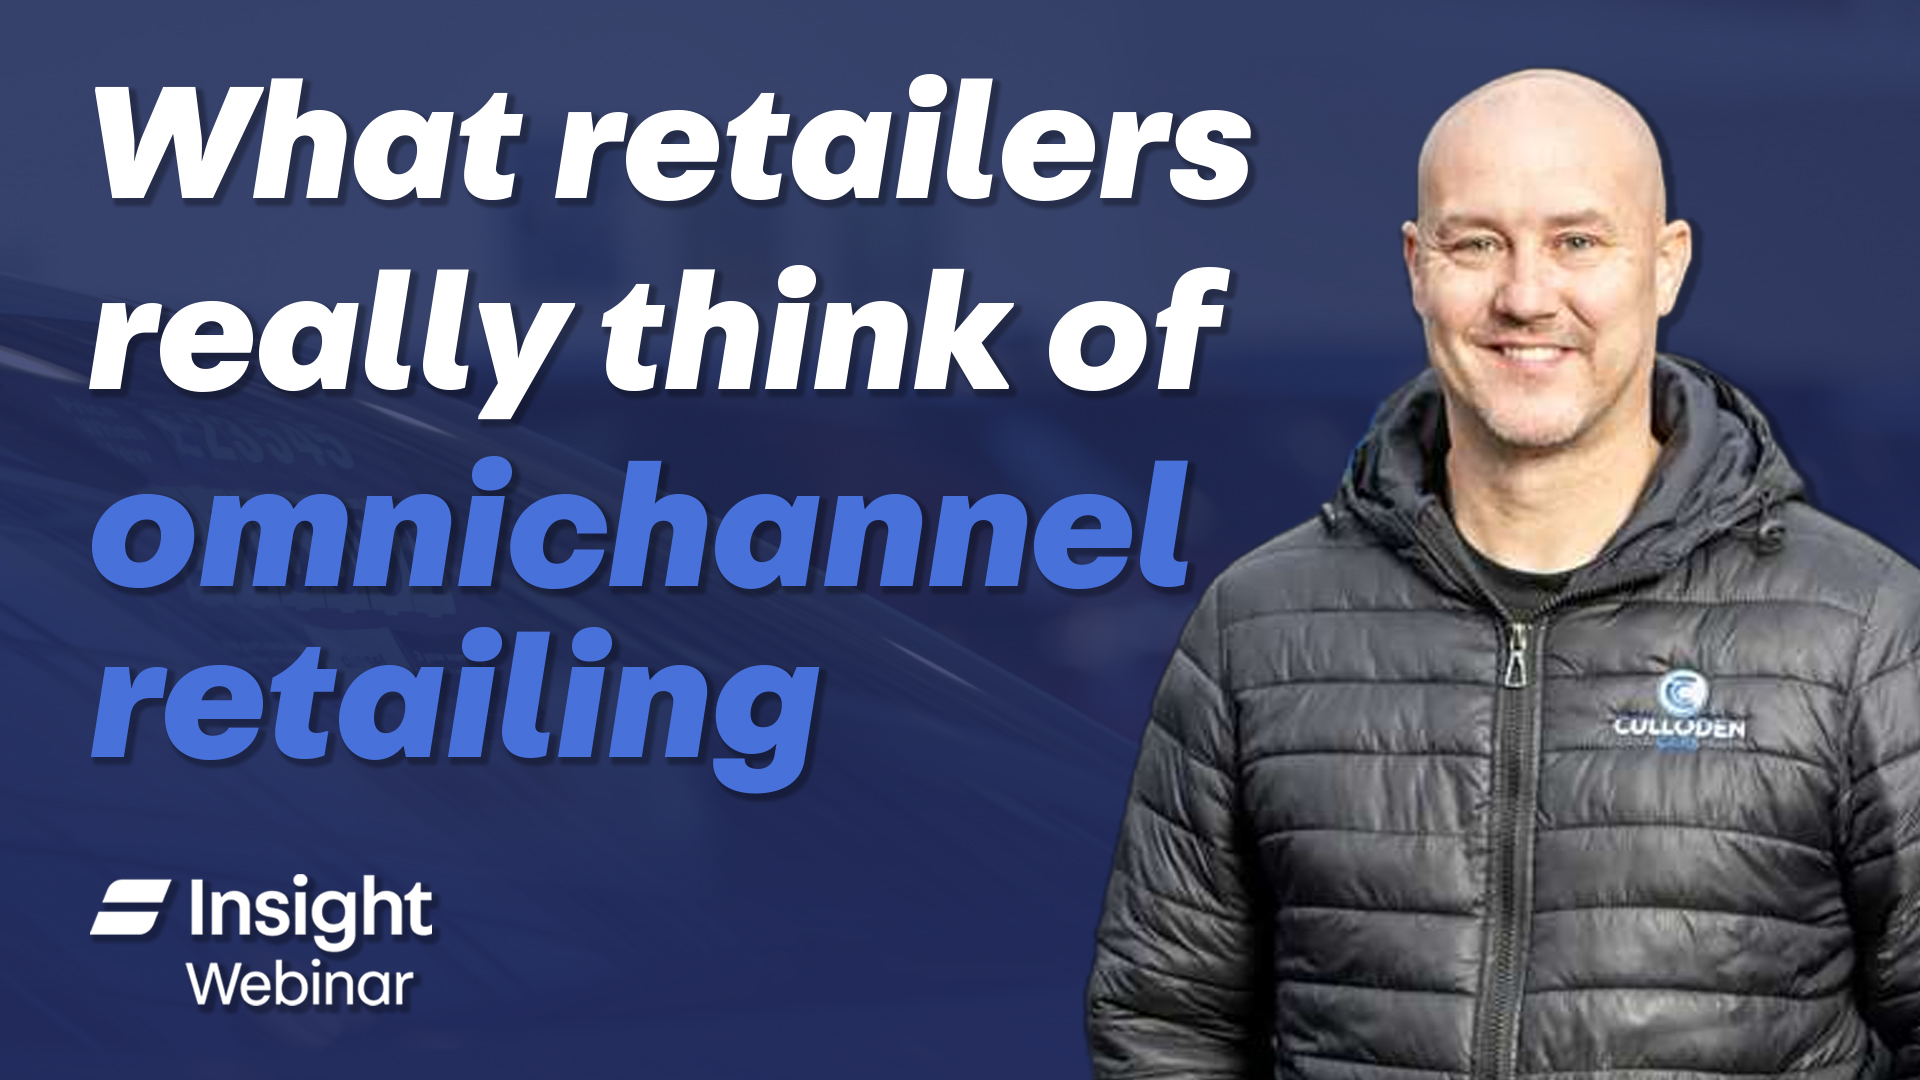 What retailers really think of omnichannel retailing